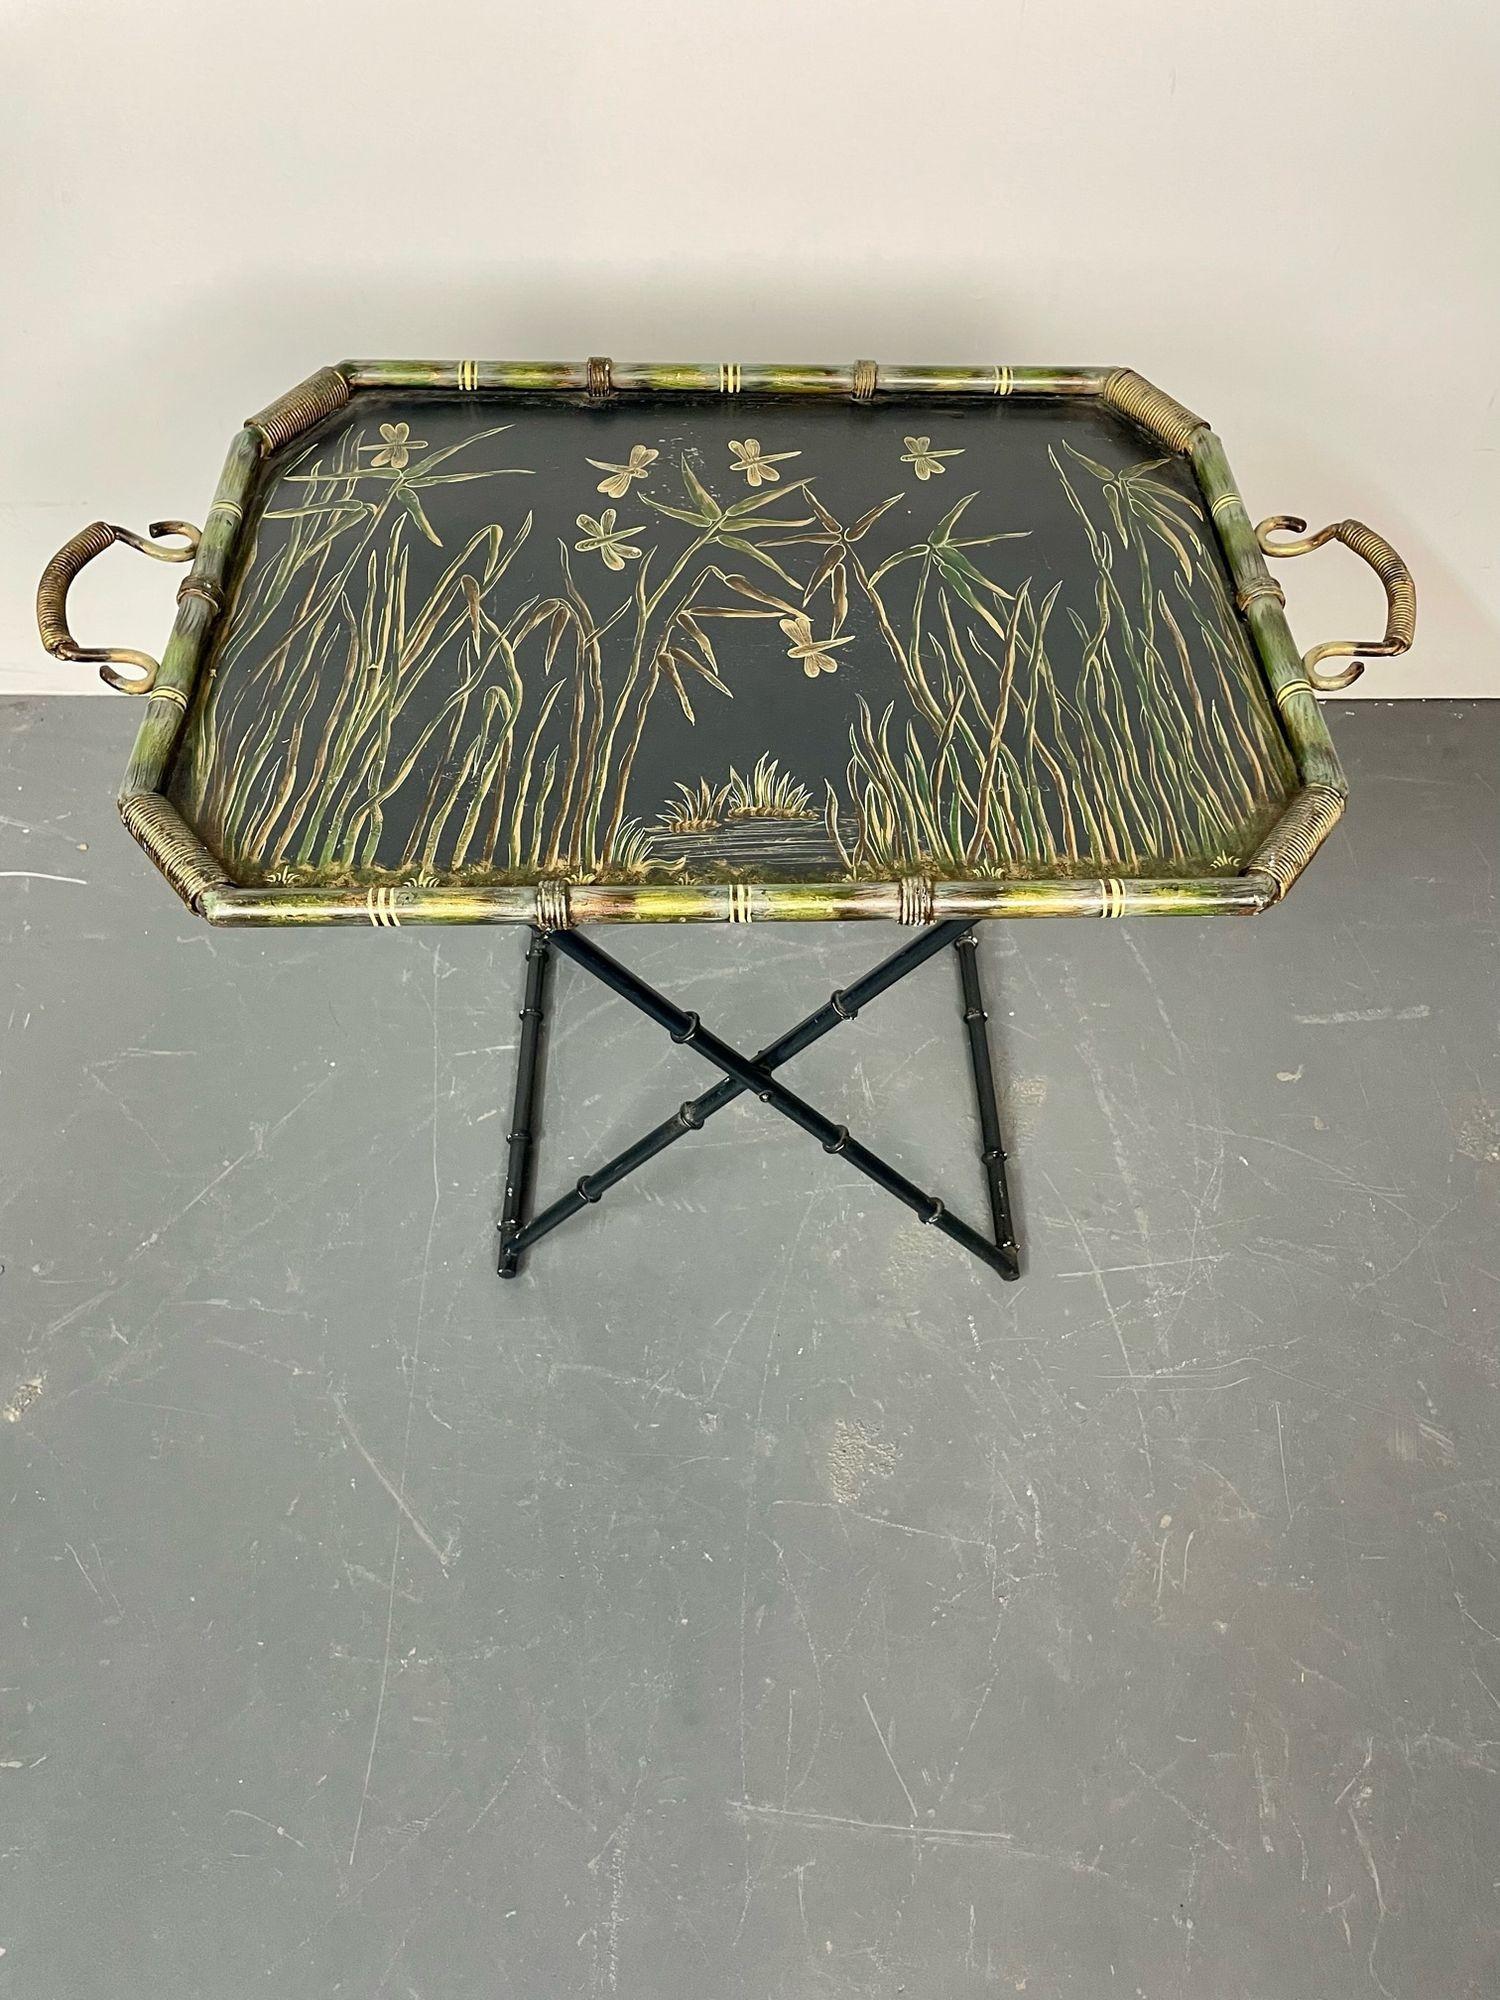 Tea or folding table faux Bamboo Metal, Asian Floral Motifs
A tole painted tray on a bamboo form paint decorated folding stand. The removeable tray top with bamboo and butterflies on top framed in a faux metal bamboo border supported by a folding